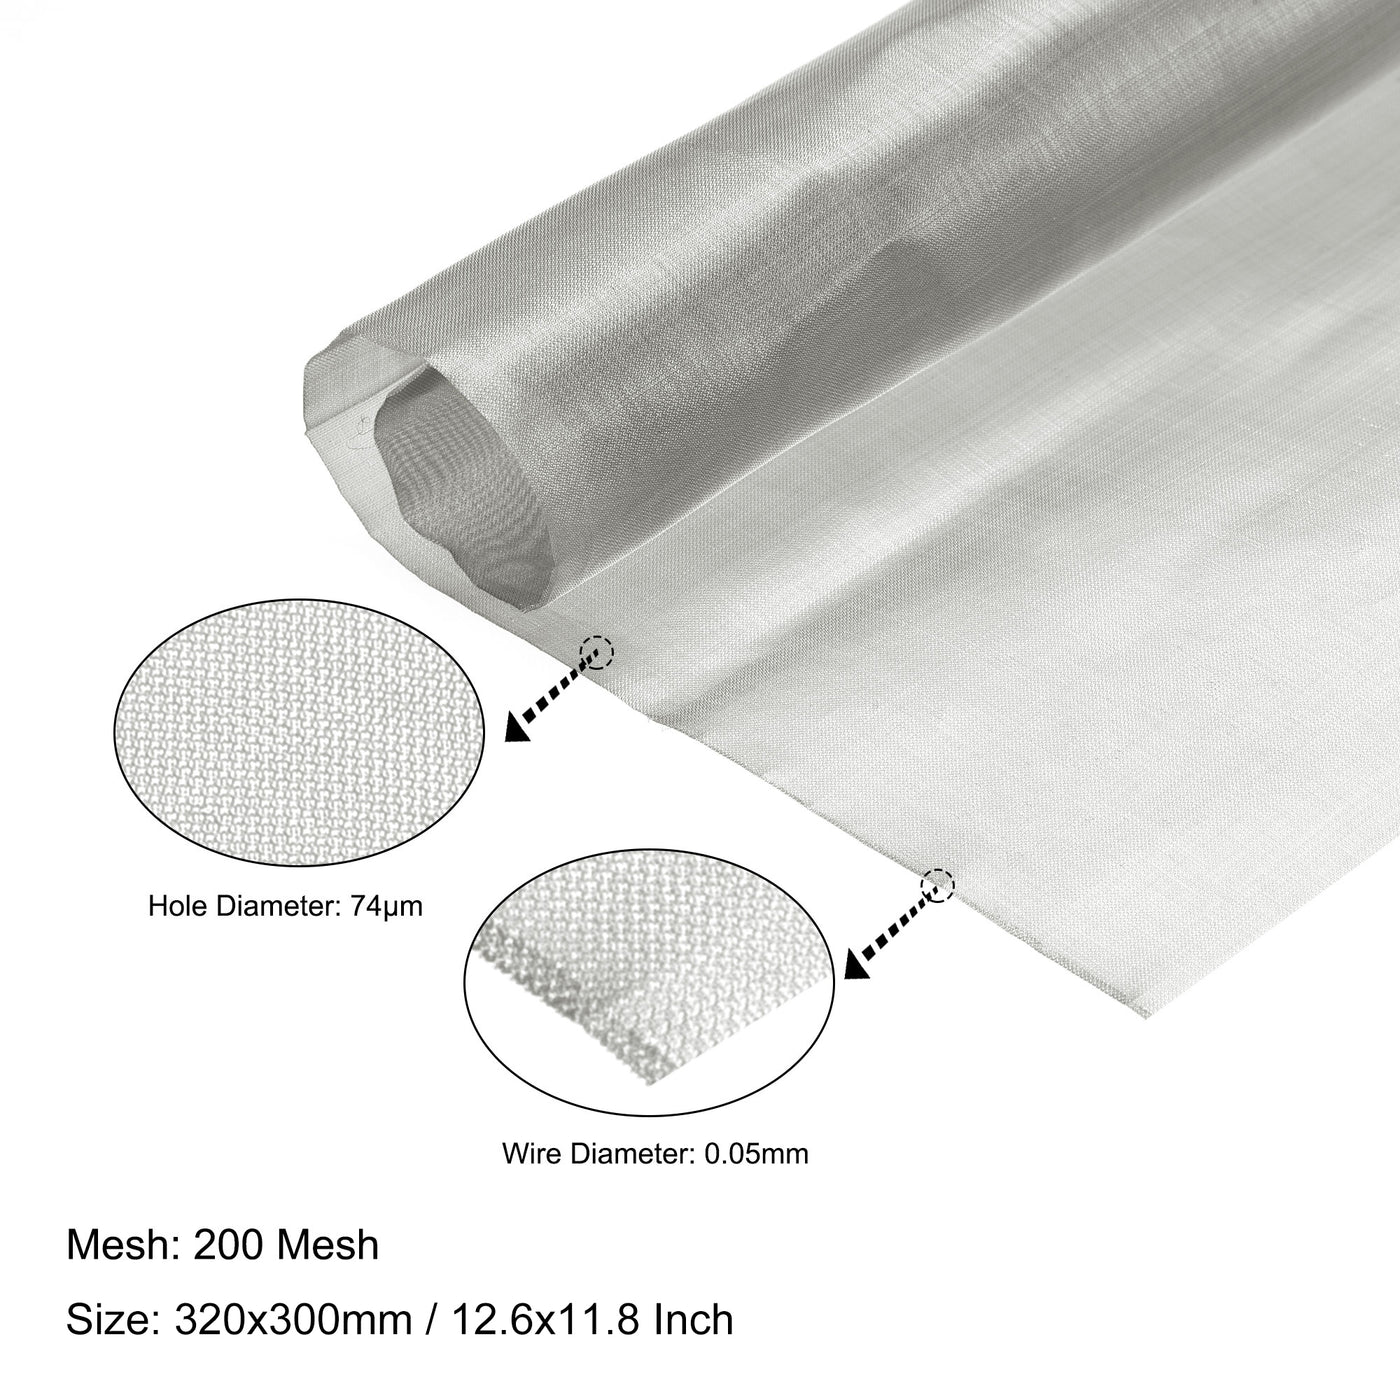 uxcell Uxcell Woven Wire Mesh 12.6"x11.8" 320x300mm, 200 Mesh 304 Stainless Steel Filter Screen Sheet, for Computer Cooling Fan Air Ventilation Cabinet